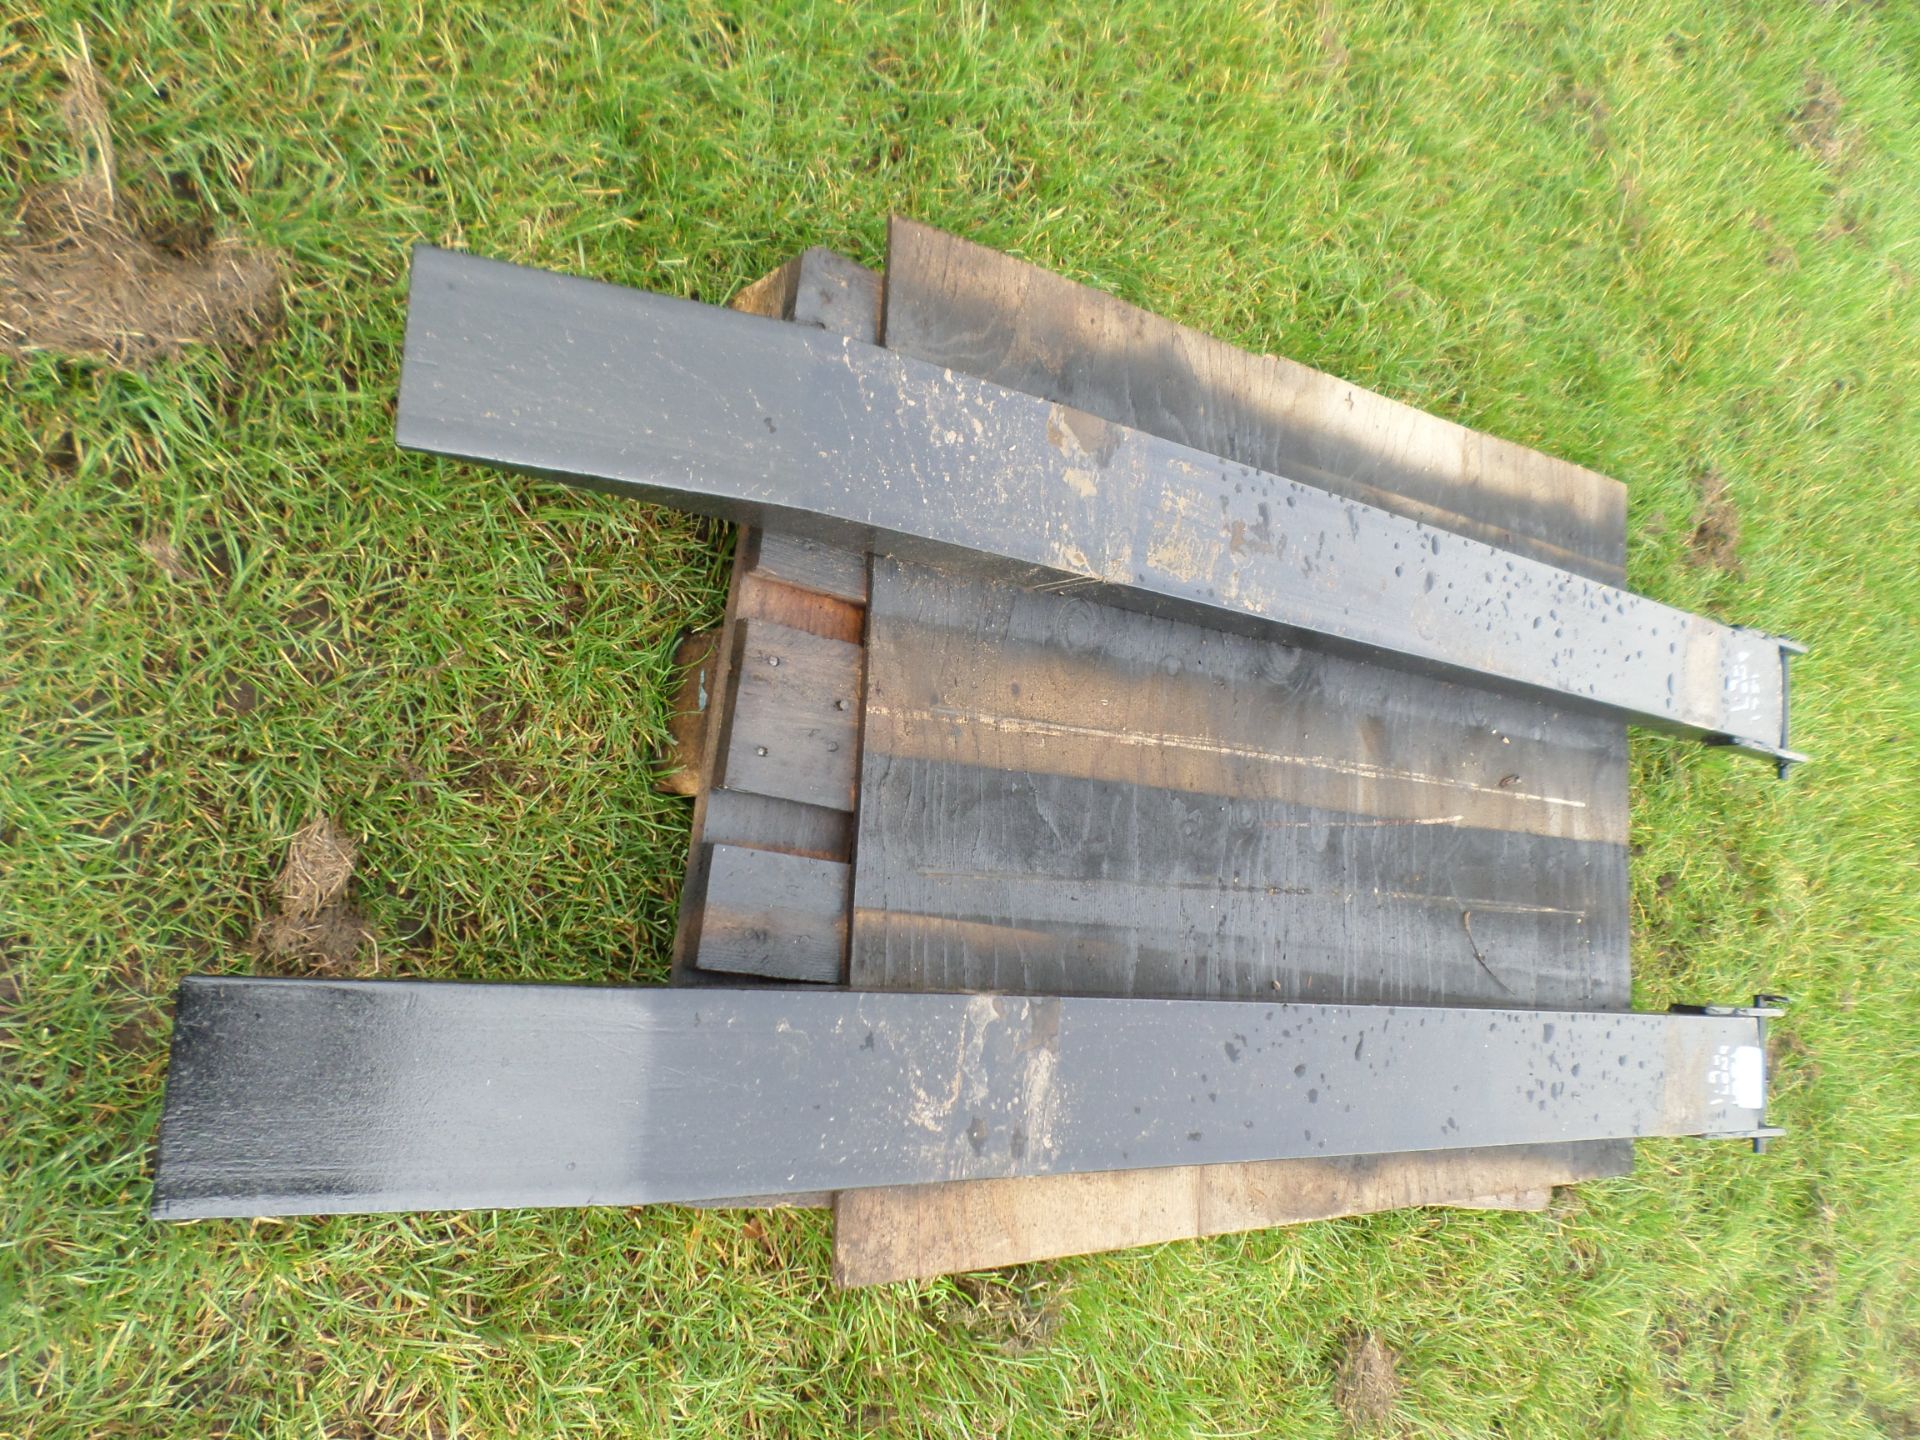 Pair of forklift extension tines, 1.9m long - Image 2 of 2